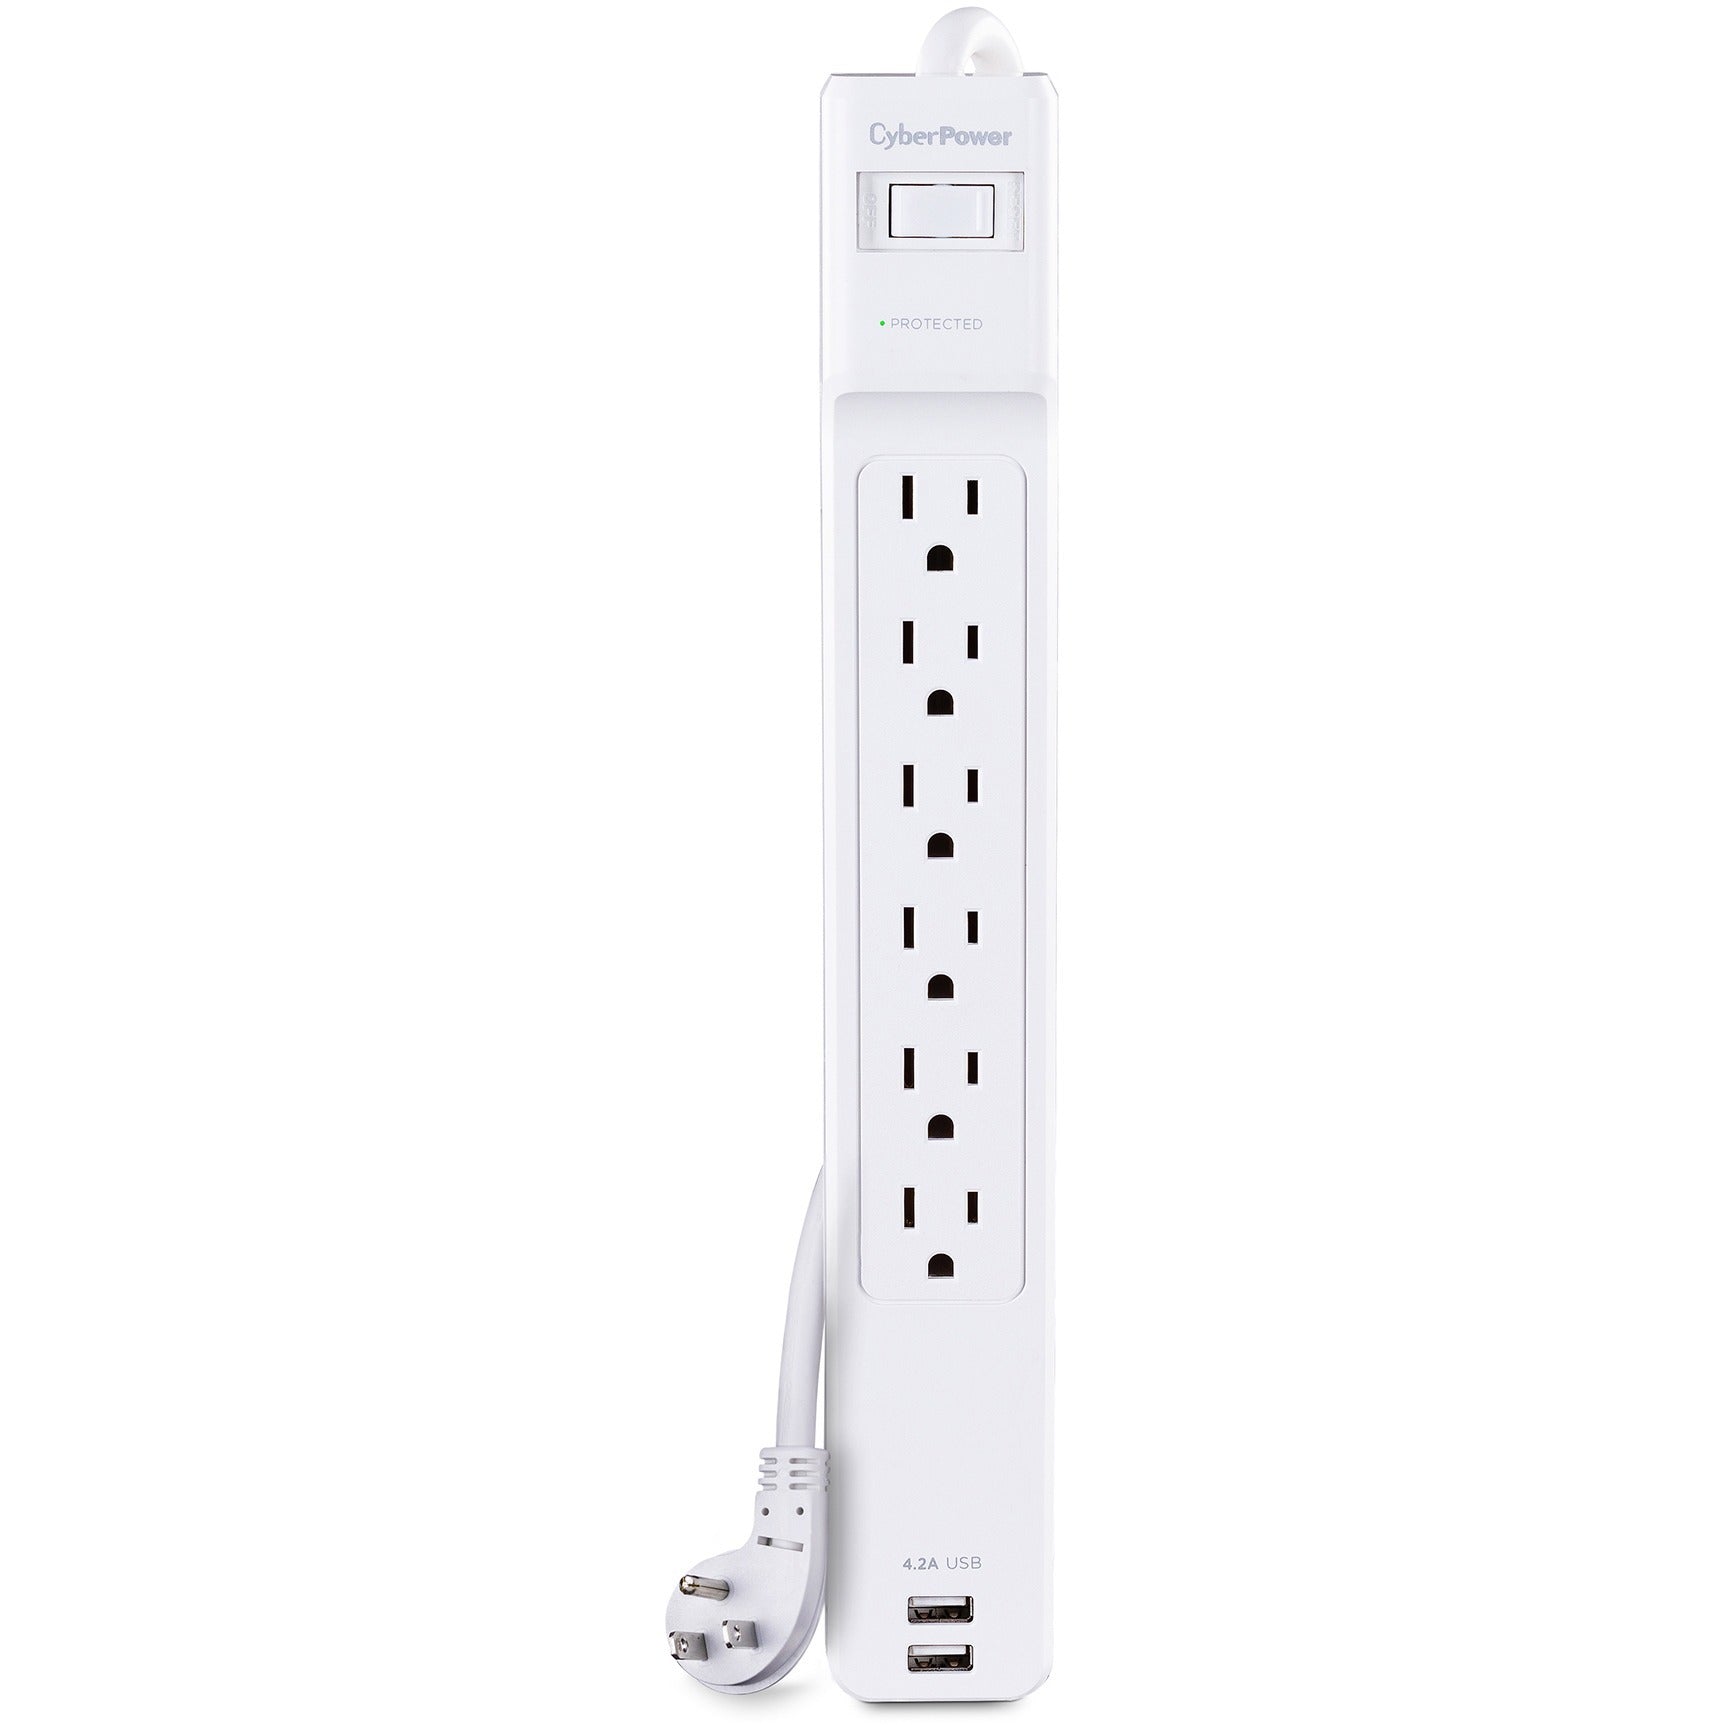 CyberPower CSP606U42A Professional 6 - Outlet Surge with 900 J